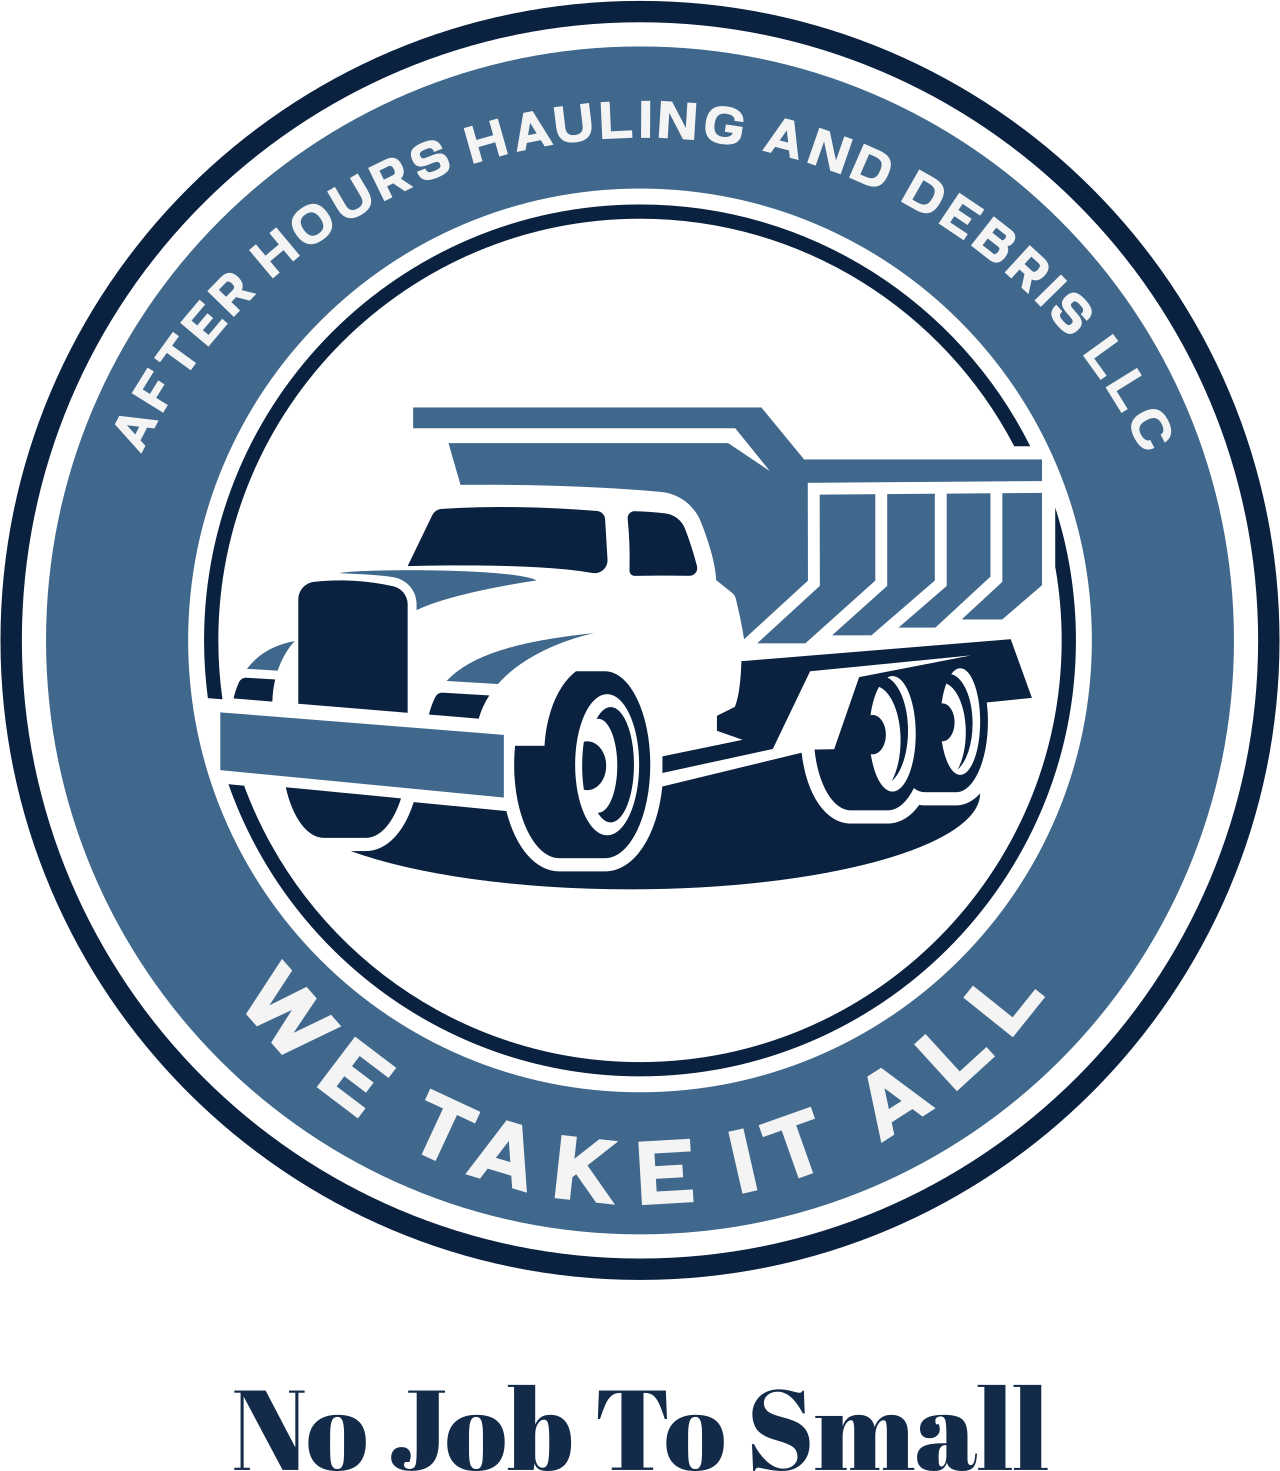 After Hours Hauling and Debris LLC's logo